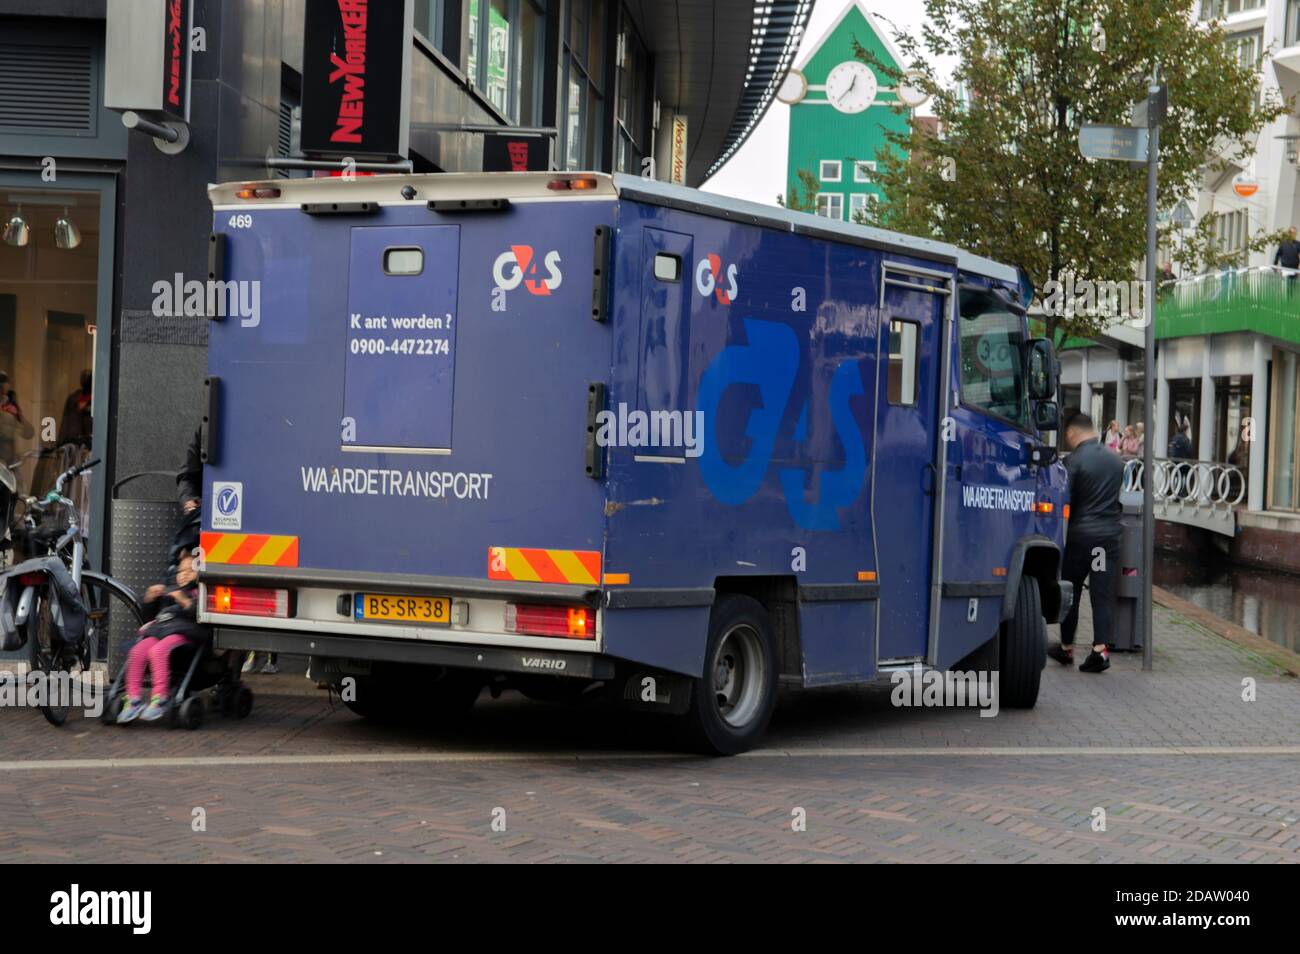 G4S Company Truck At Amsterdam The Netherlands Stock Photo